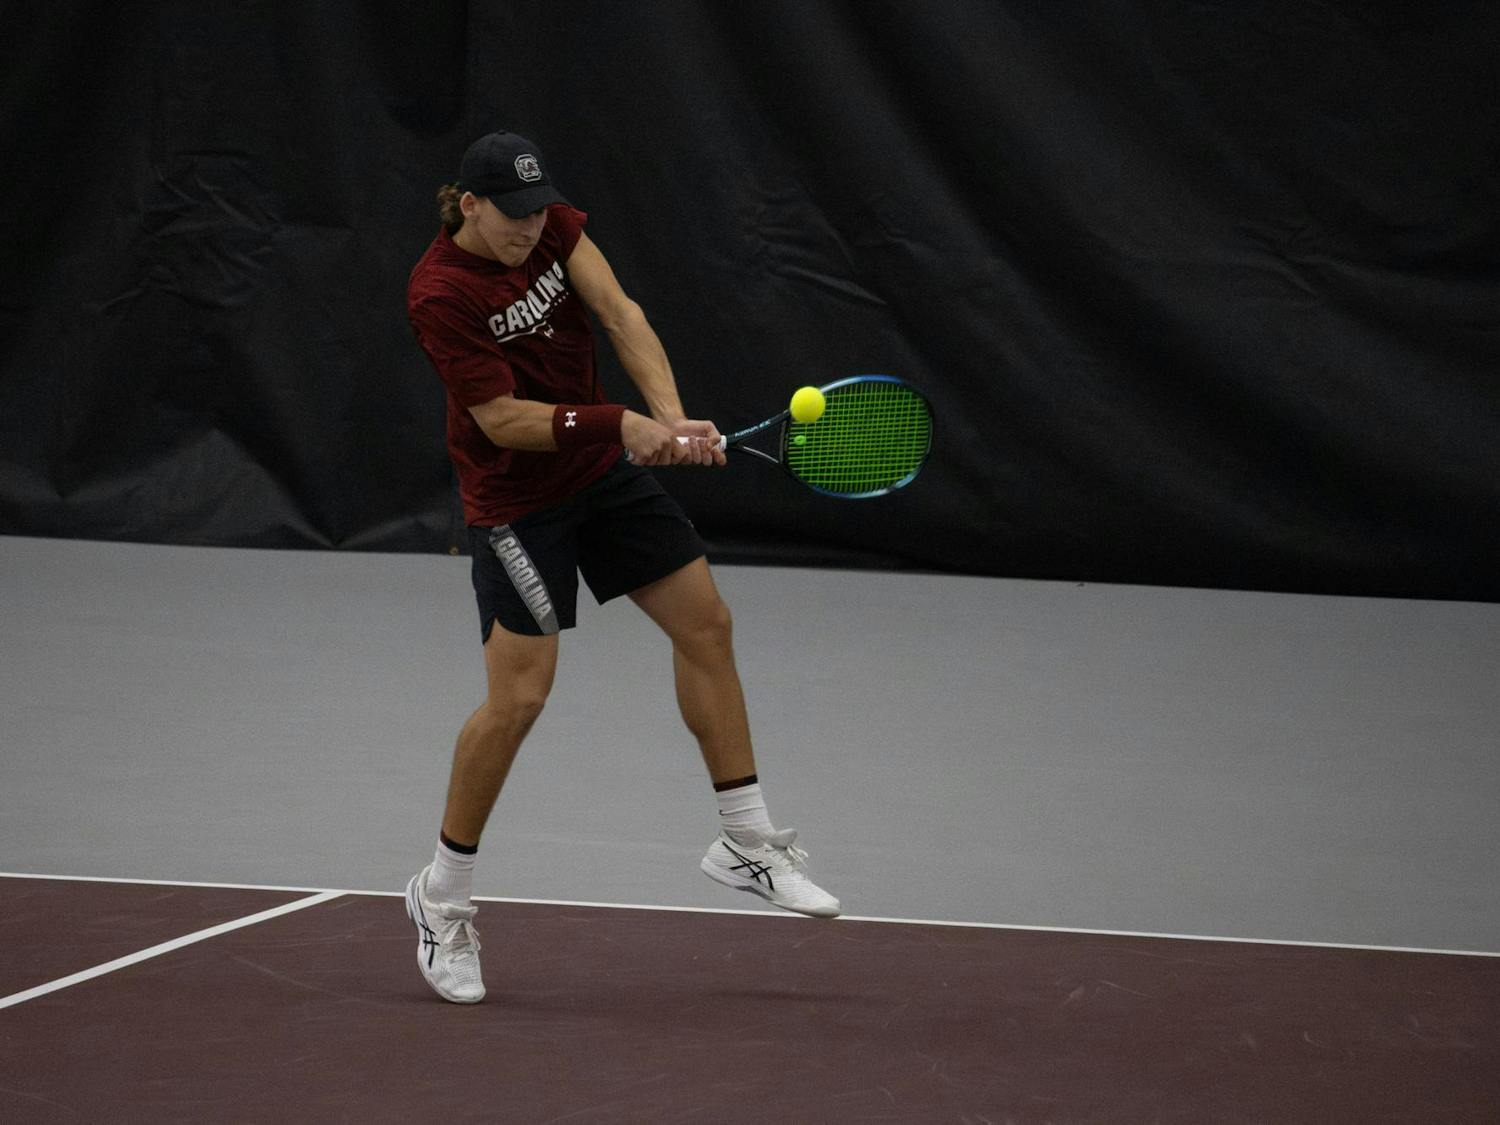 Junior Casey Hoole backhands the ball during South Carolina’s match against Clemson at the Carolina Indoor Tennis Center on Jan. 27, 2024. The Gamecocks beat the Tigers 4-2 in the rivalry matchup.